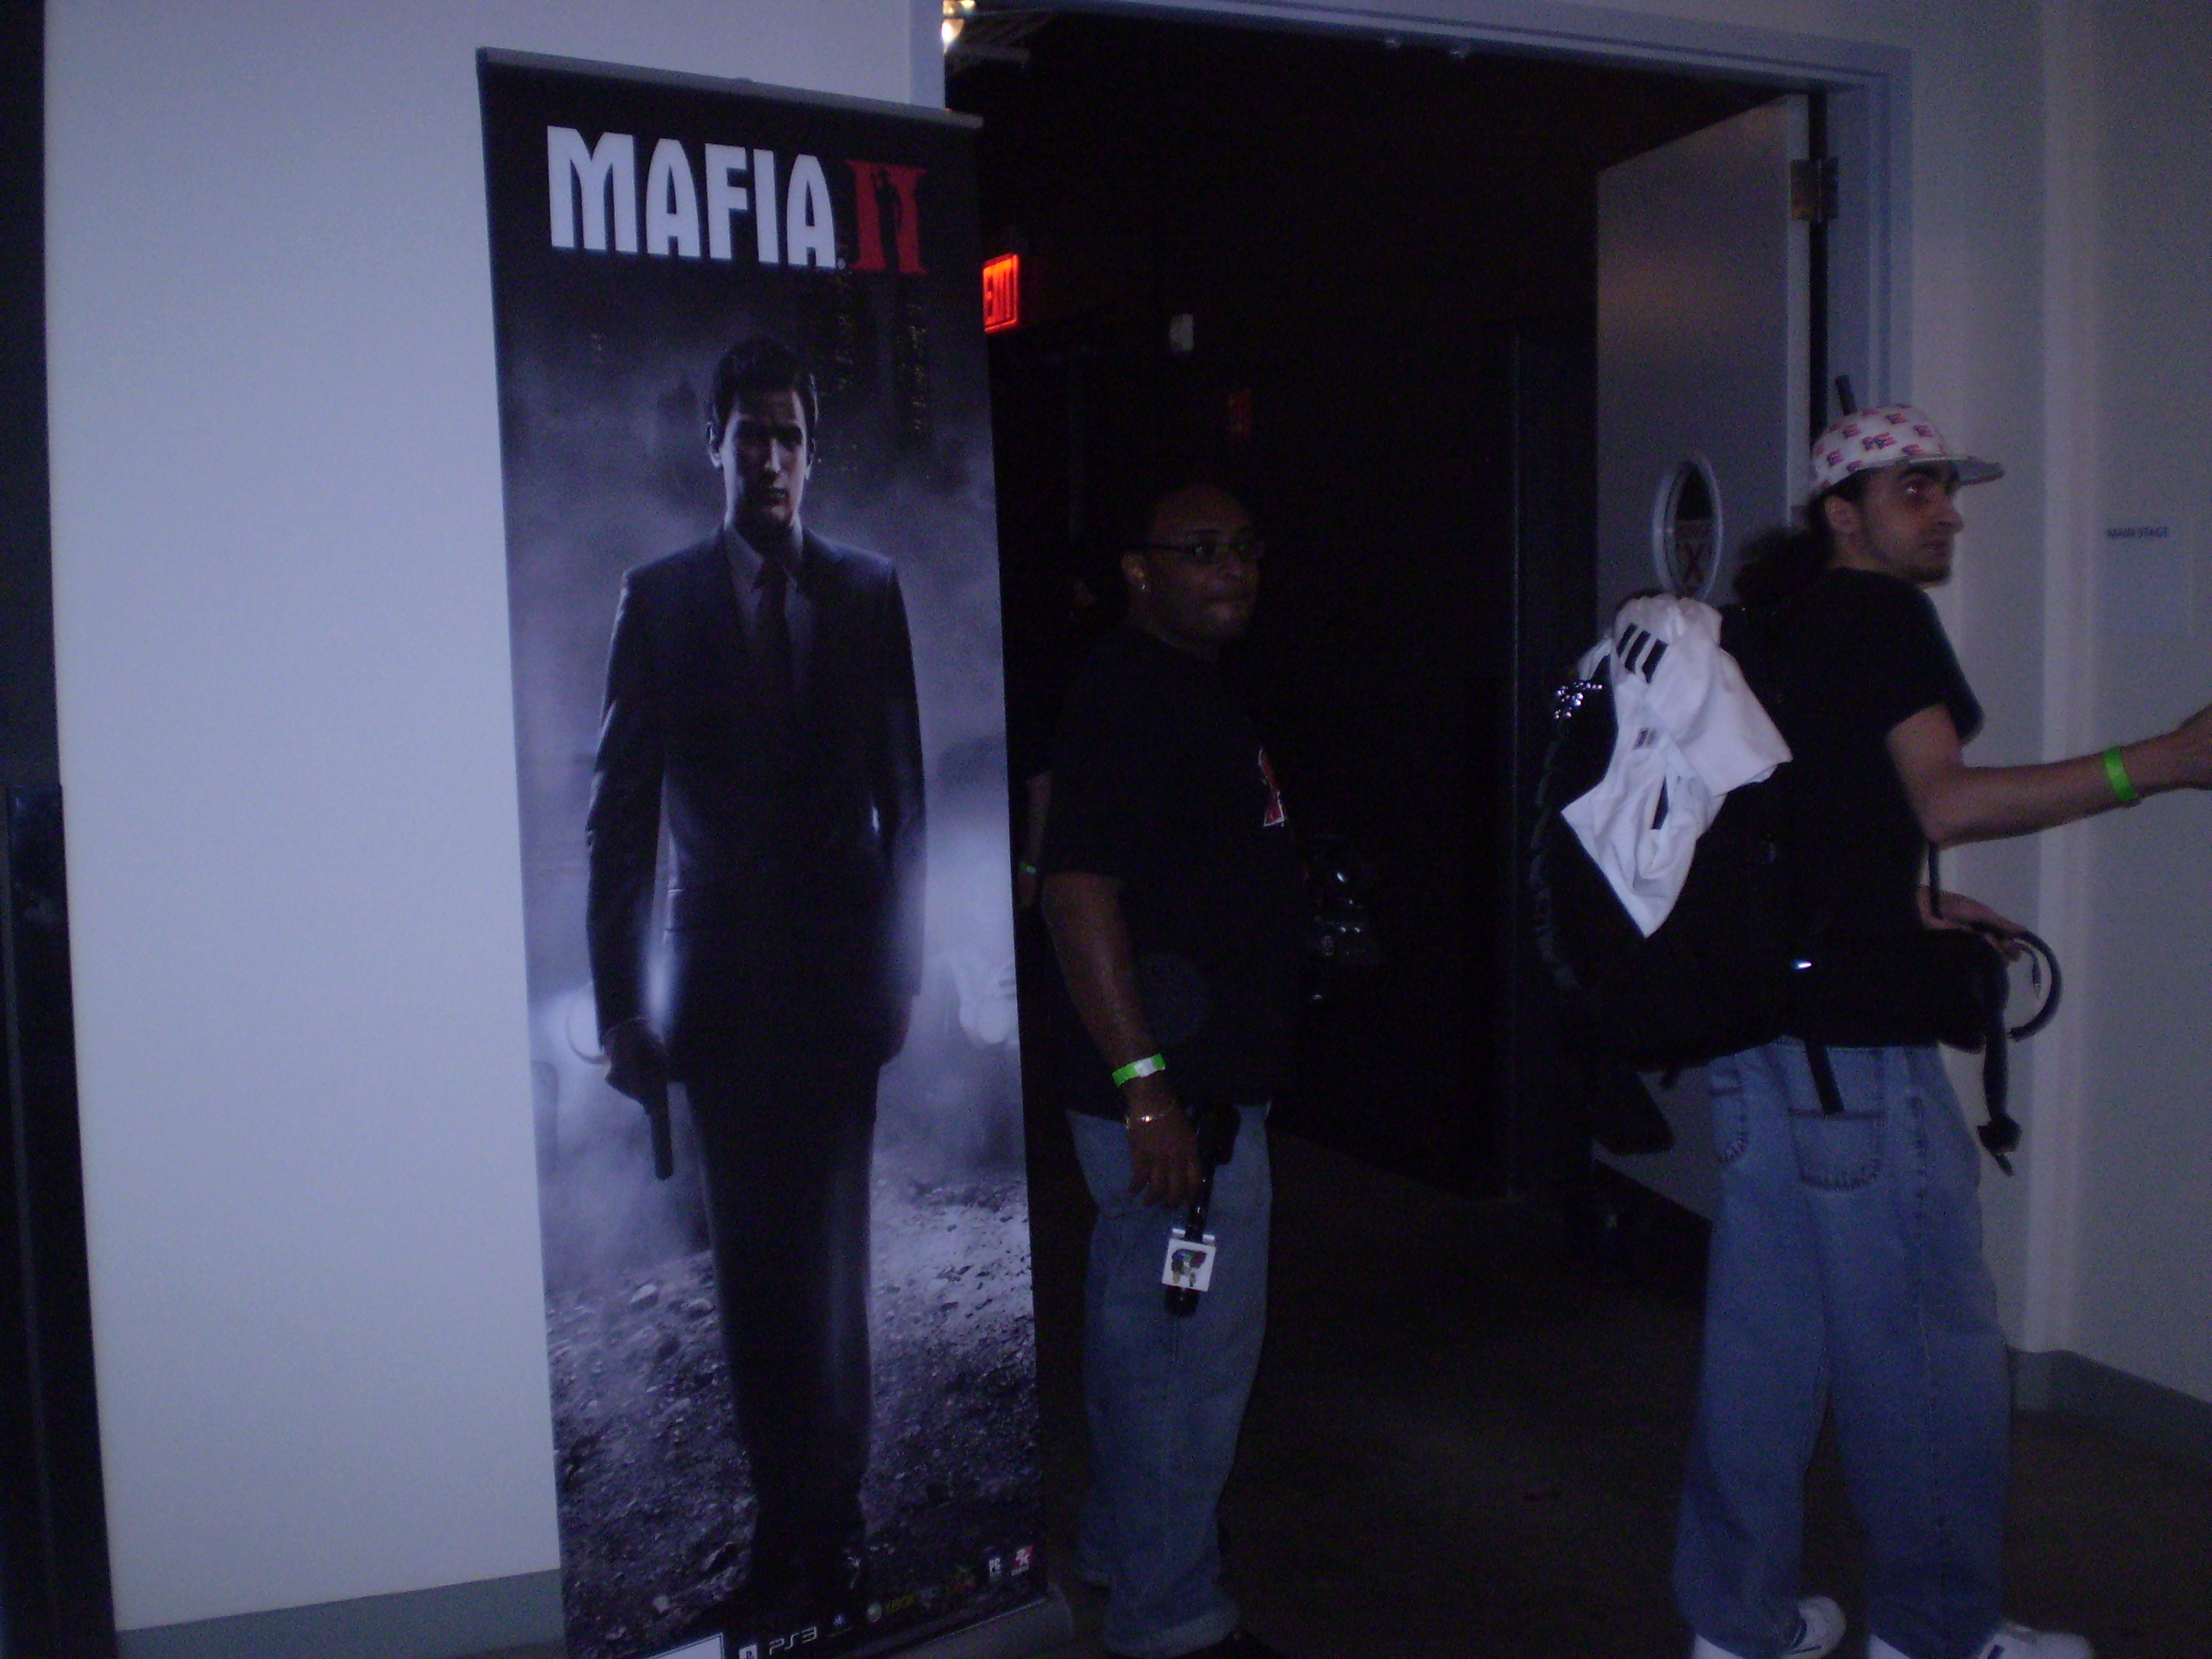 Another Mafia II Vito poster outside of the bar and stage.